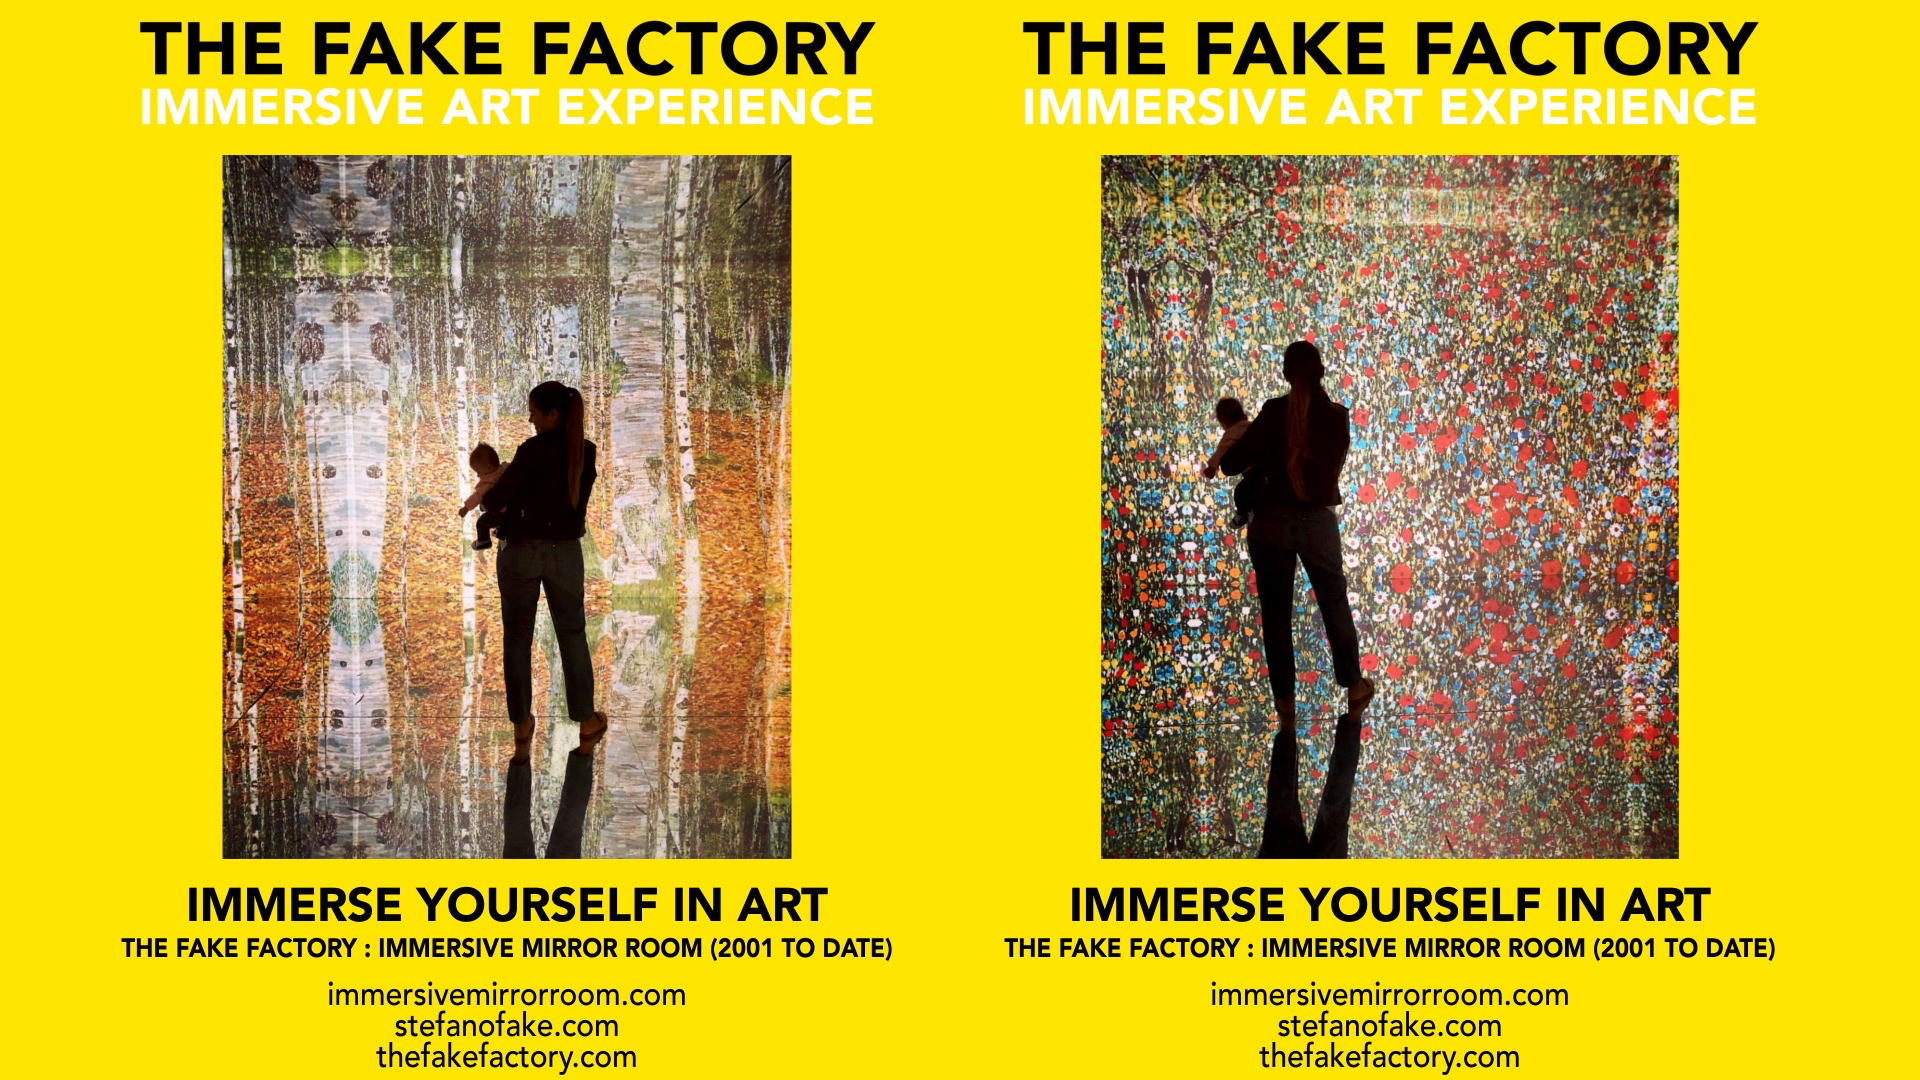 THE FAKE FACTORY IMMERSIVE ART EXPERIENCE 2012-2020 FORMAT.149